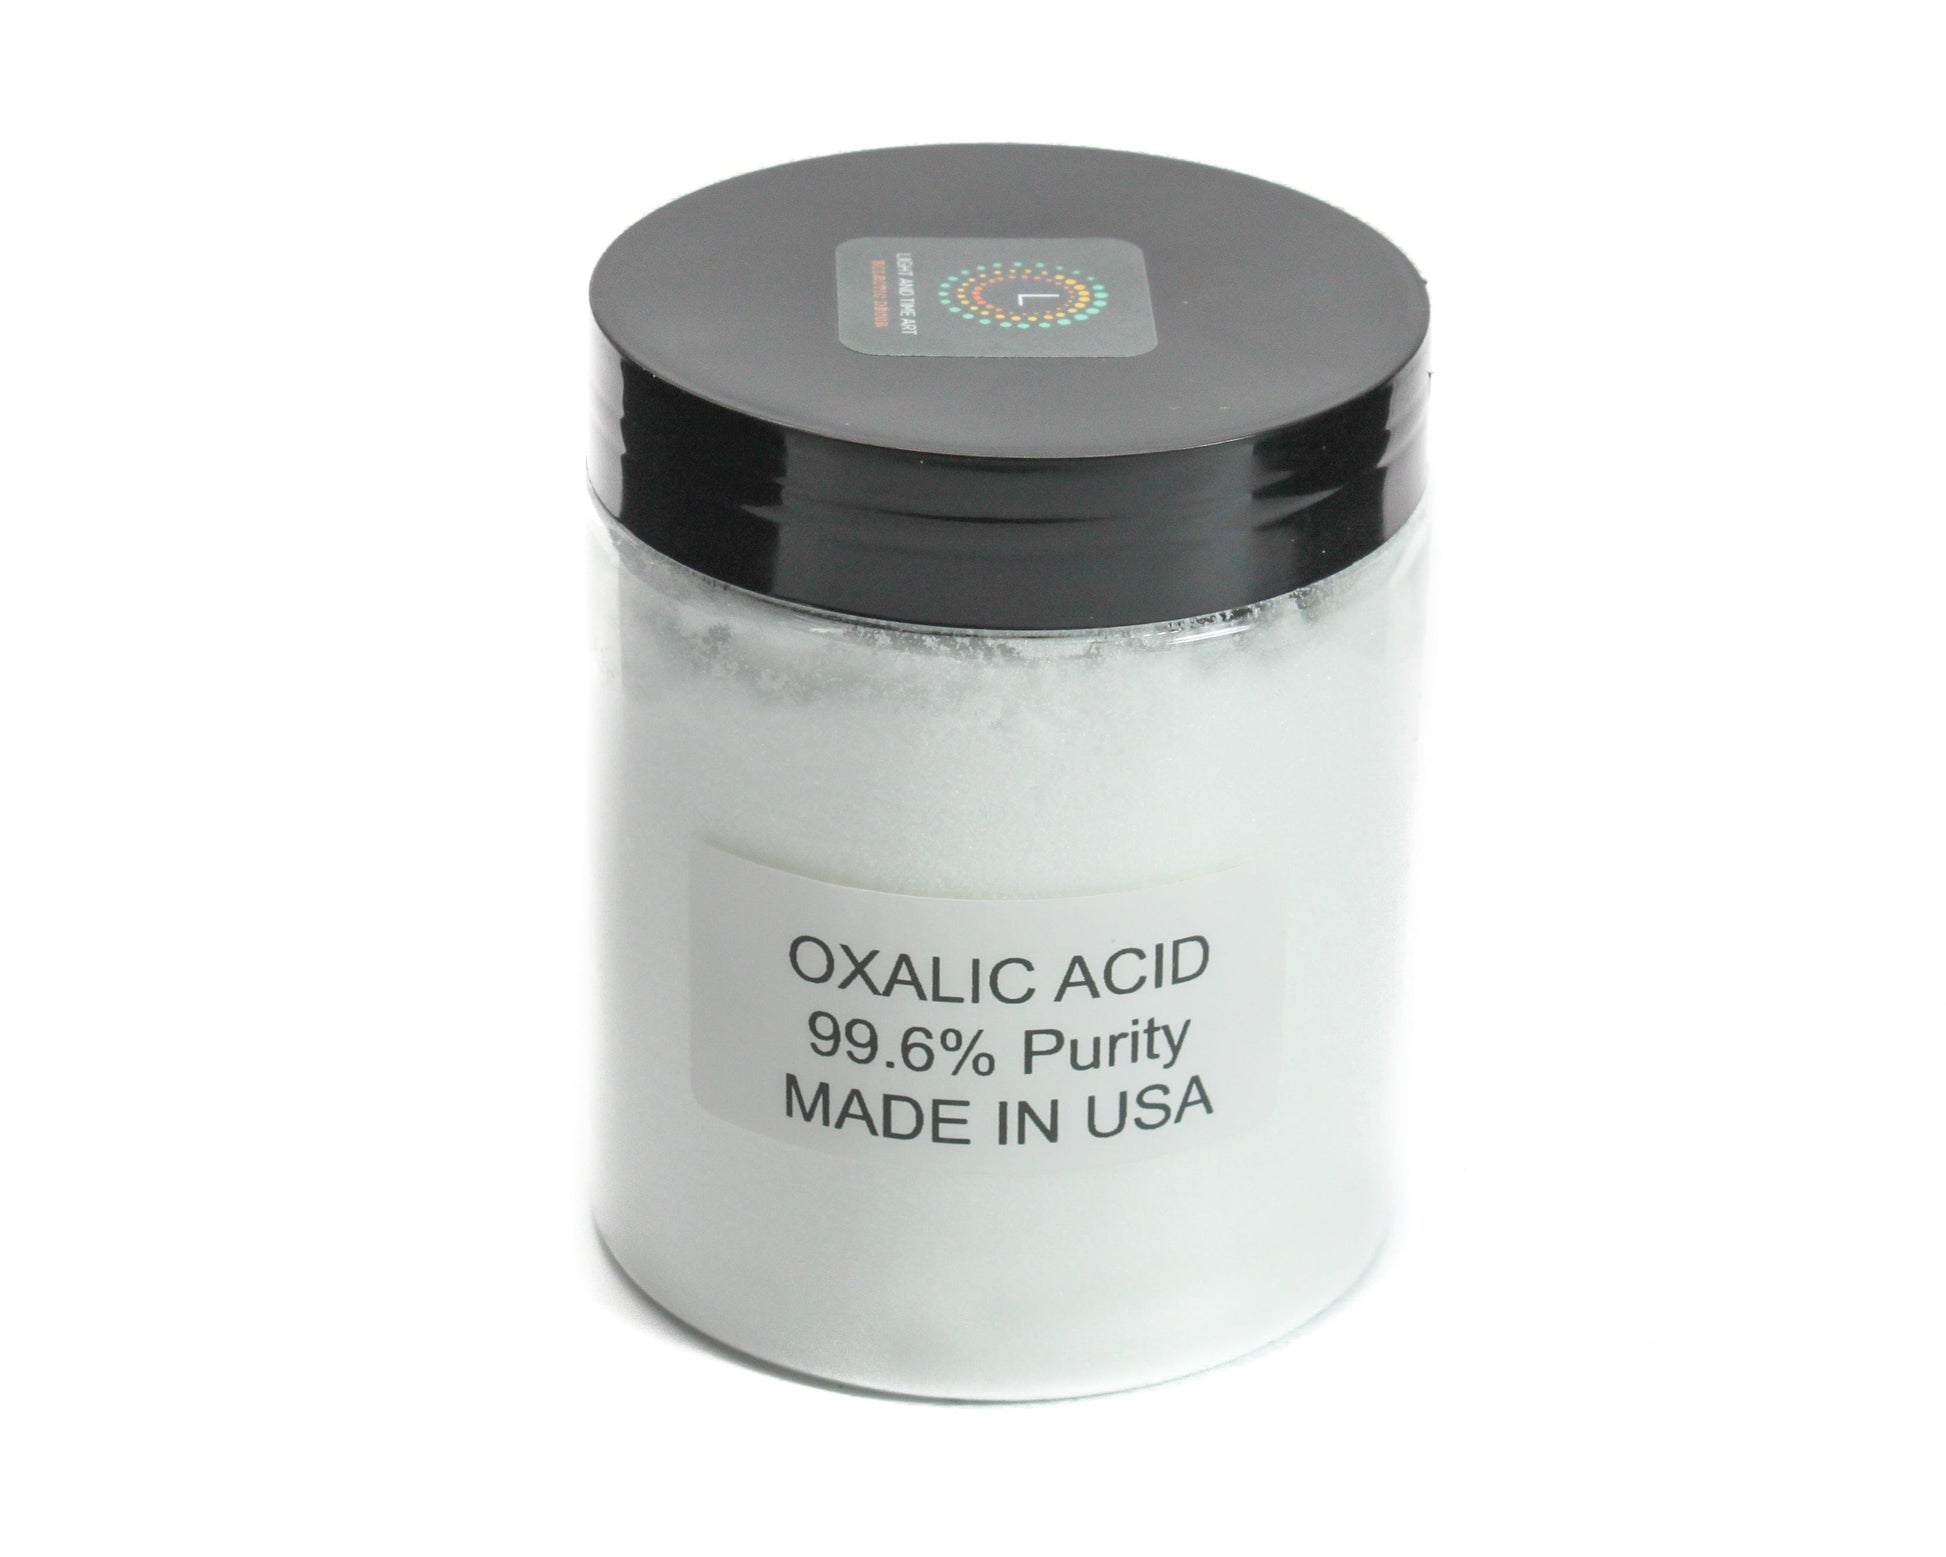 Florida Laboratories, Inc Glass & Surface Cleaners Oxalic Acid 99.6% Crystals for Insulator Cleaning